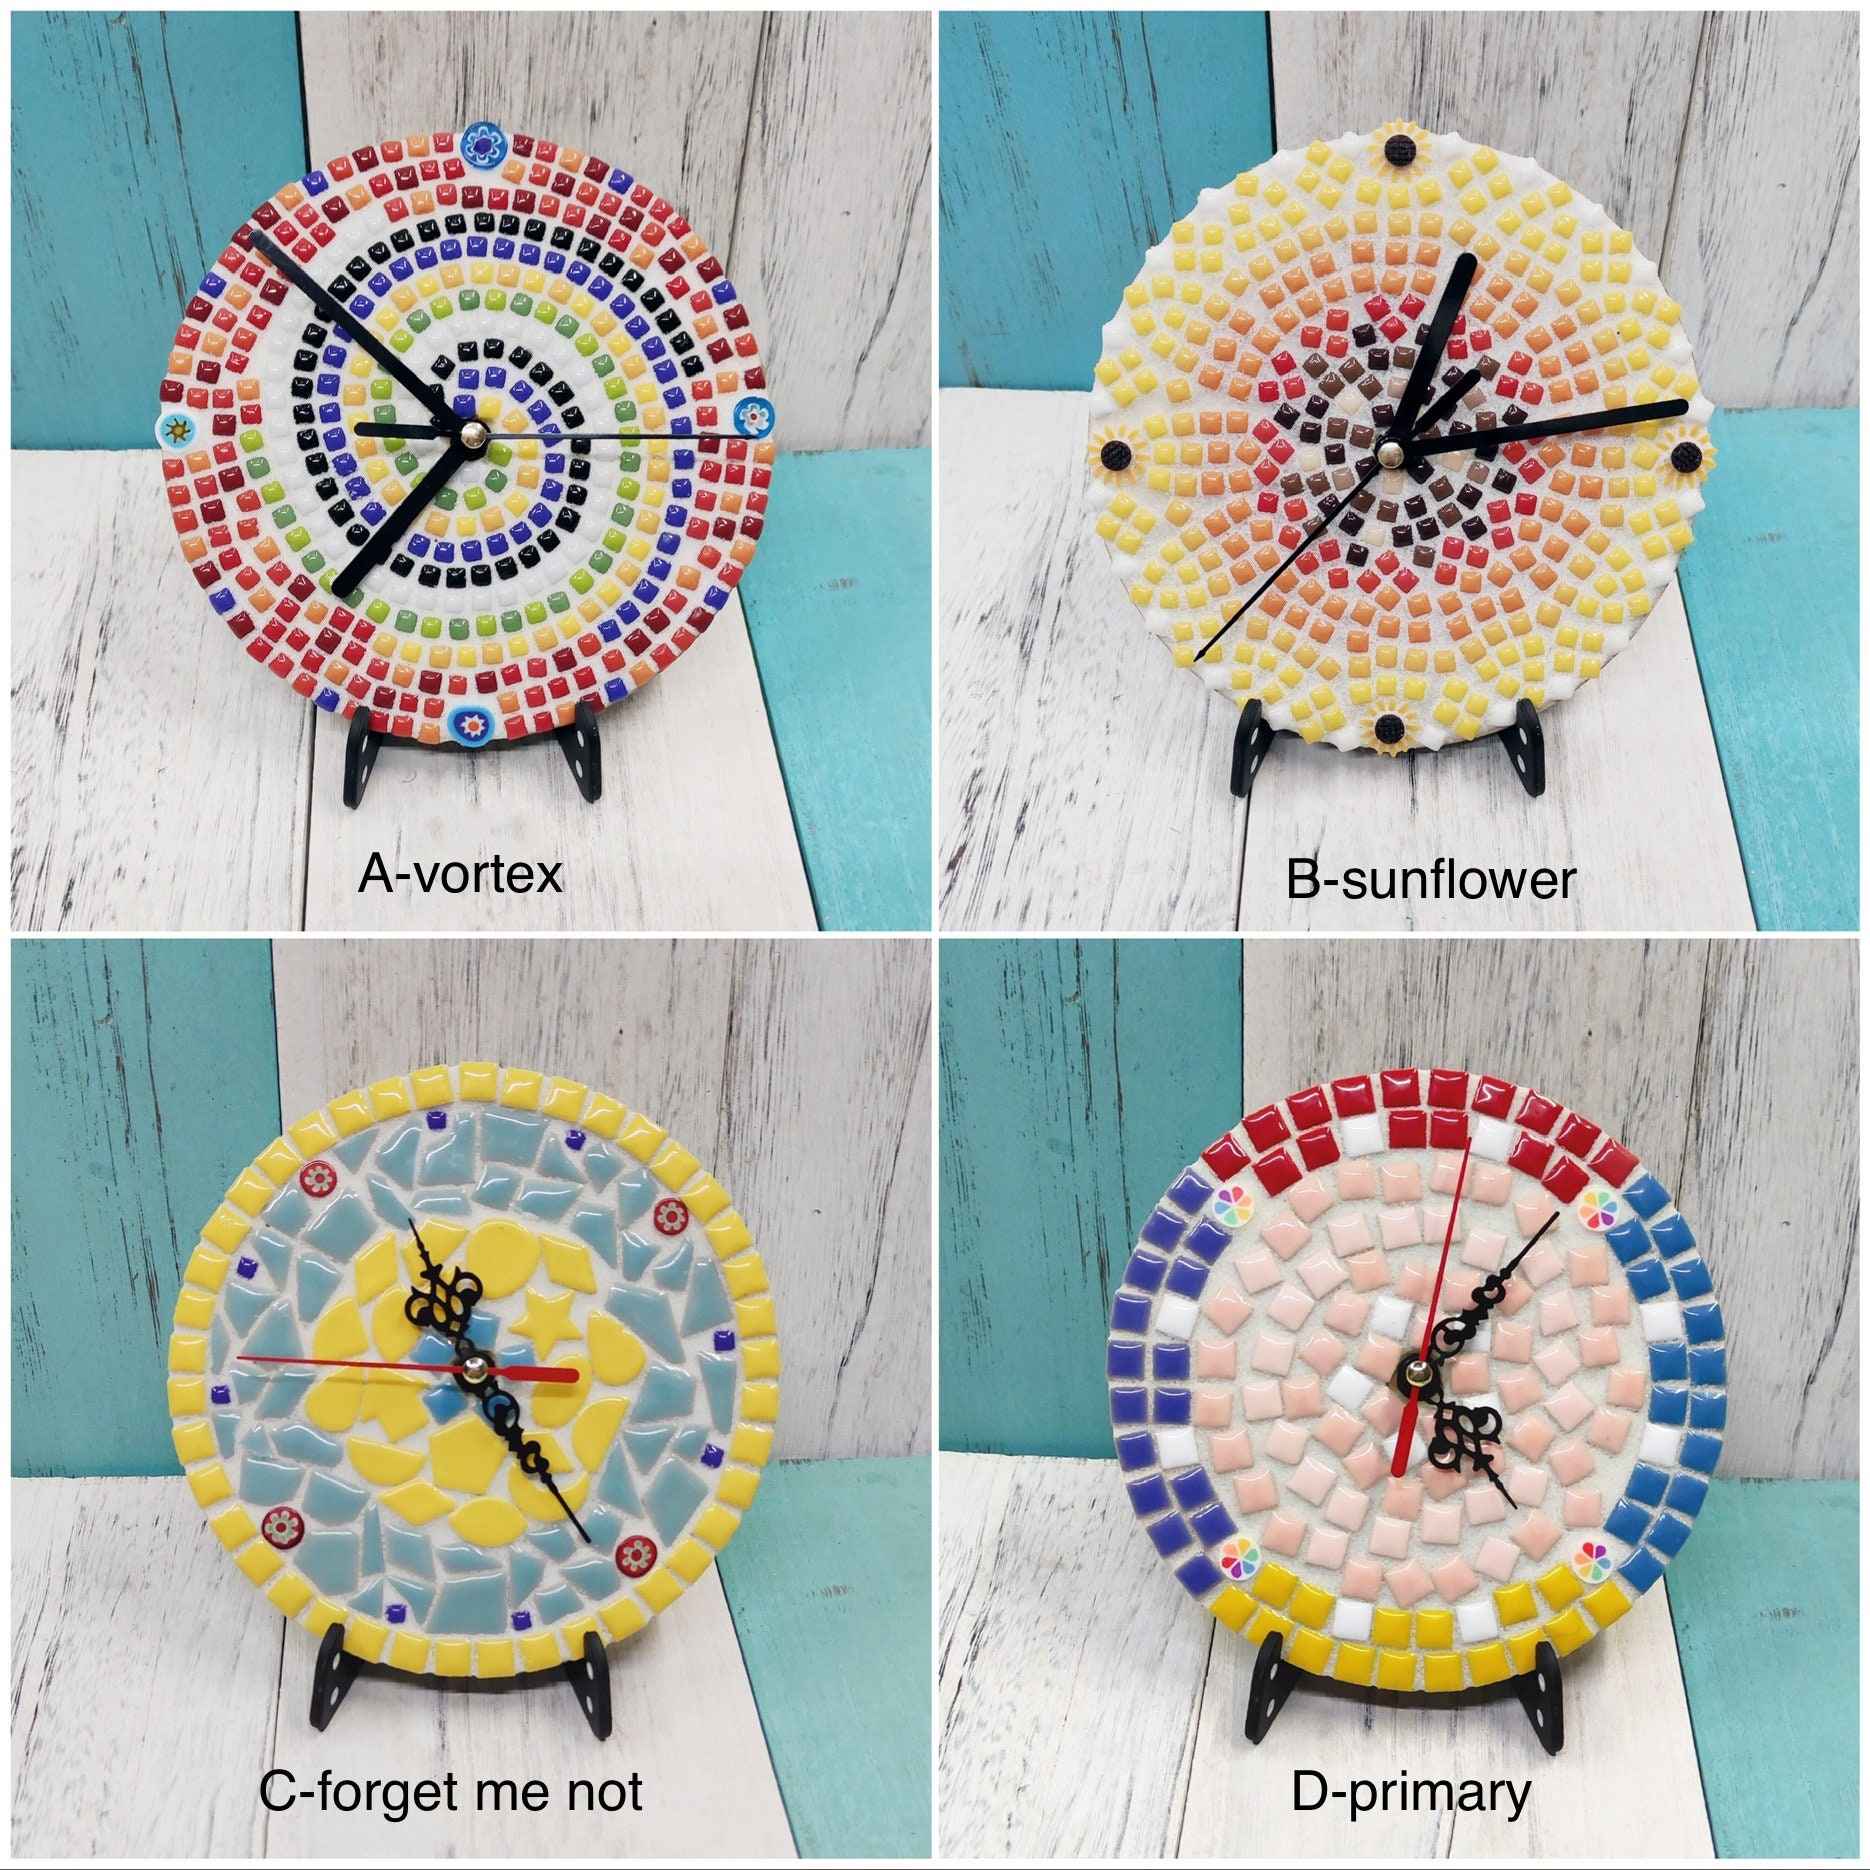  ONE TO FOUR Mosaic Kids Wall Clock for Do It Yourself